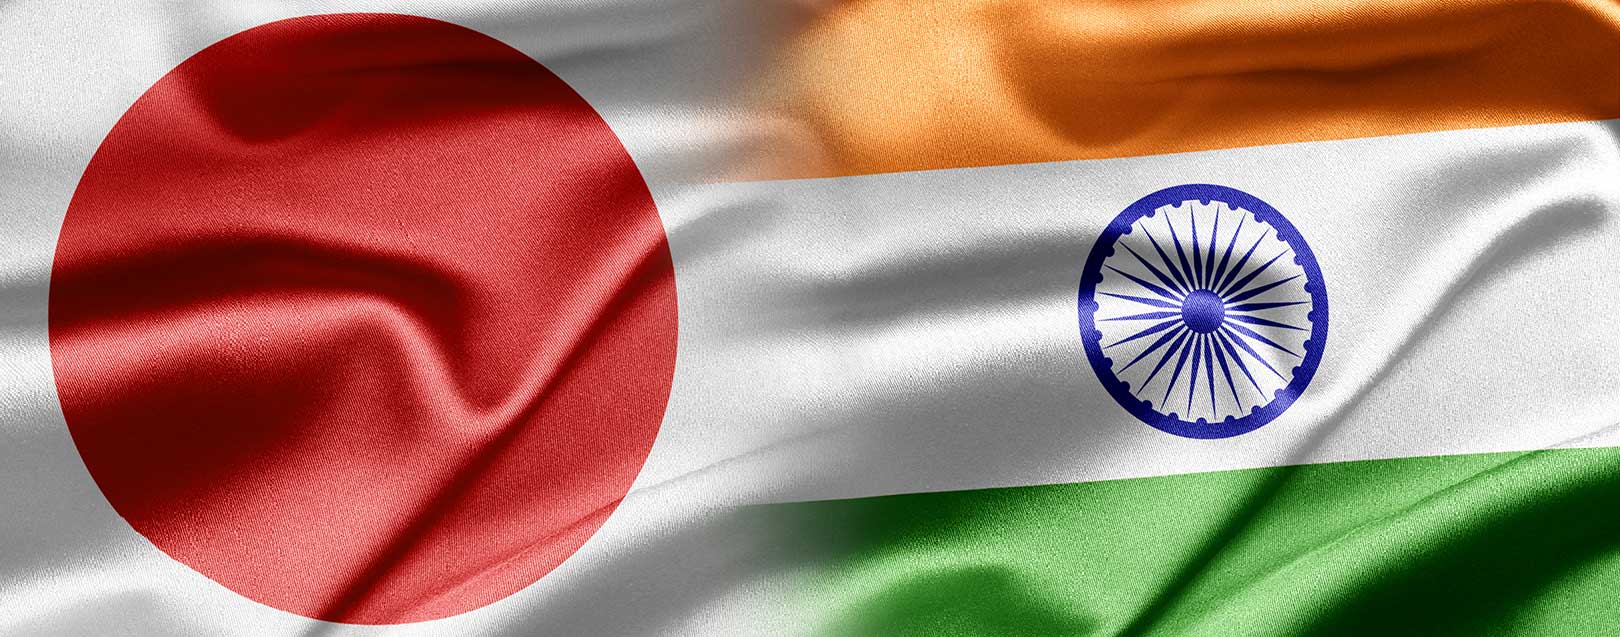 India, Japan ties on infra development offer opportunities for Singapore cos